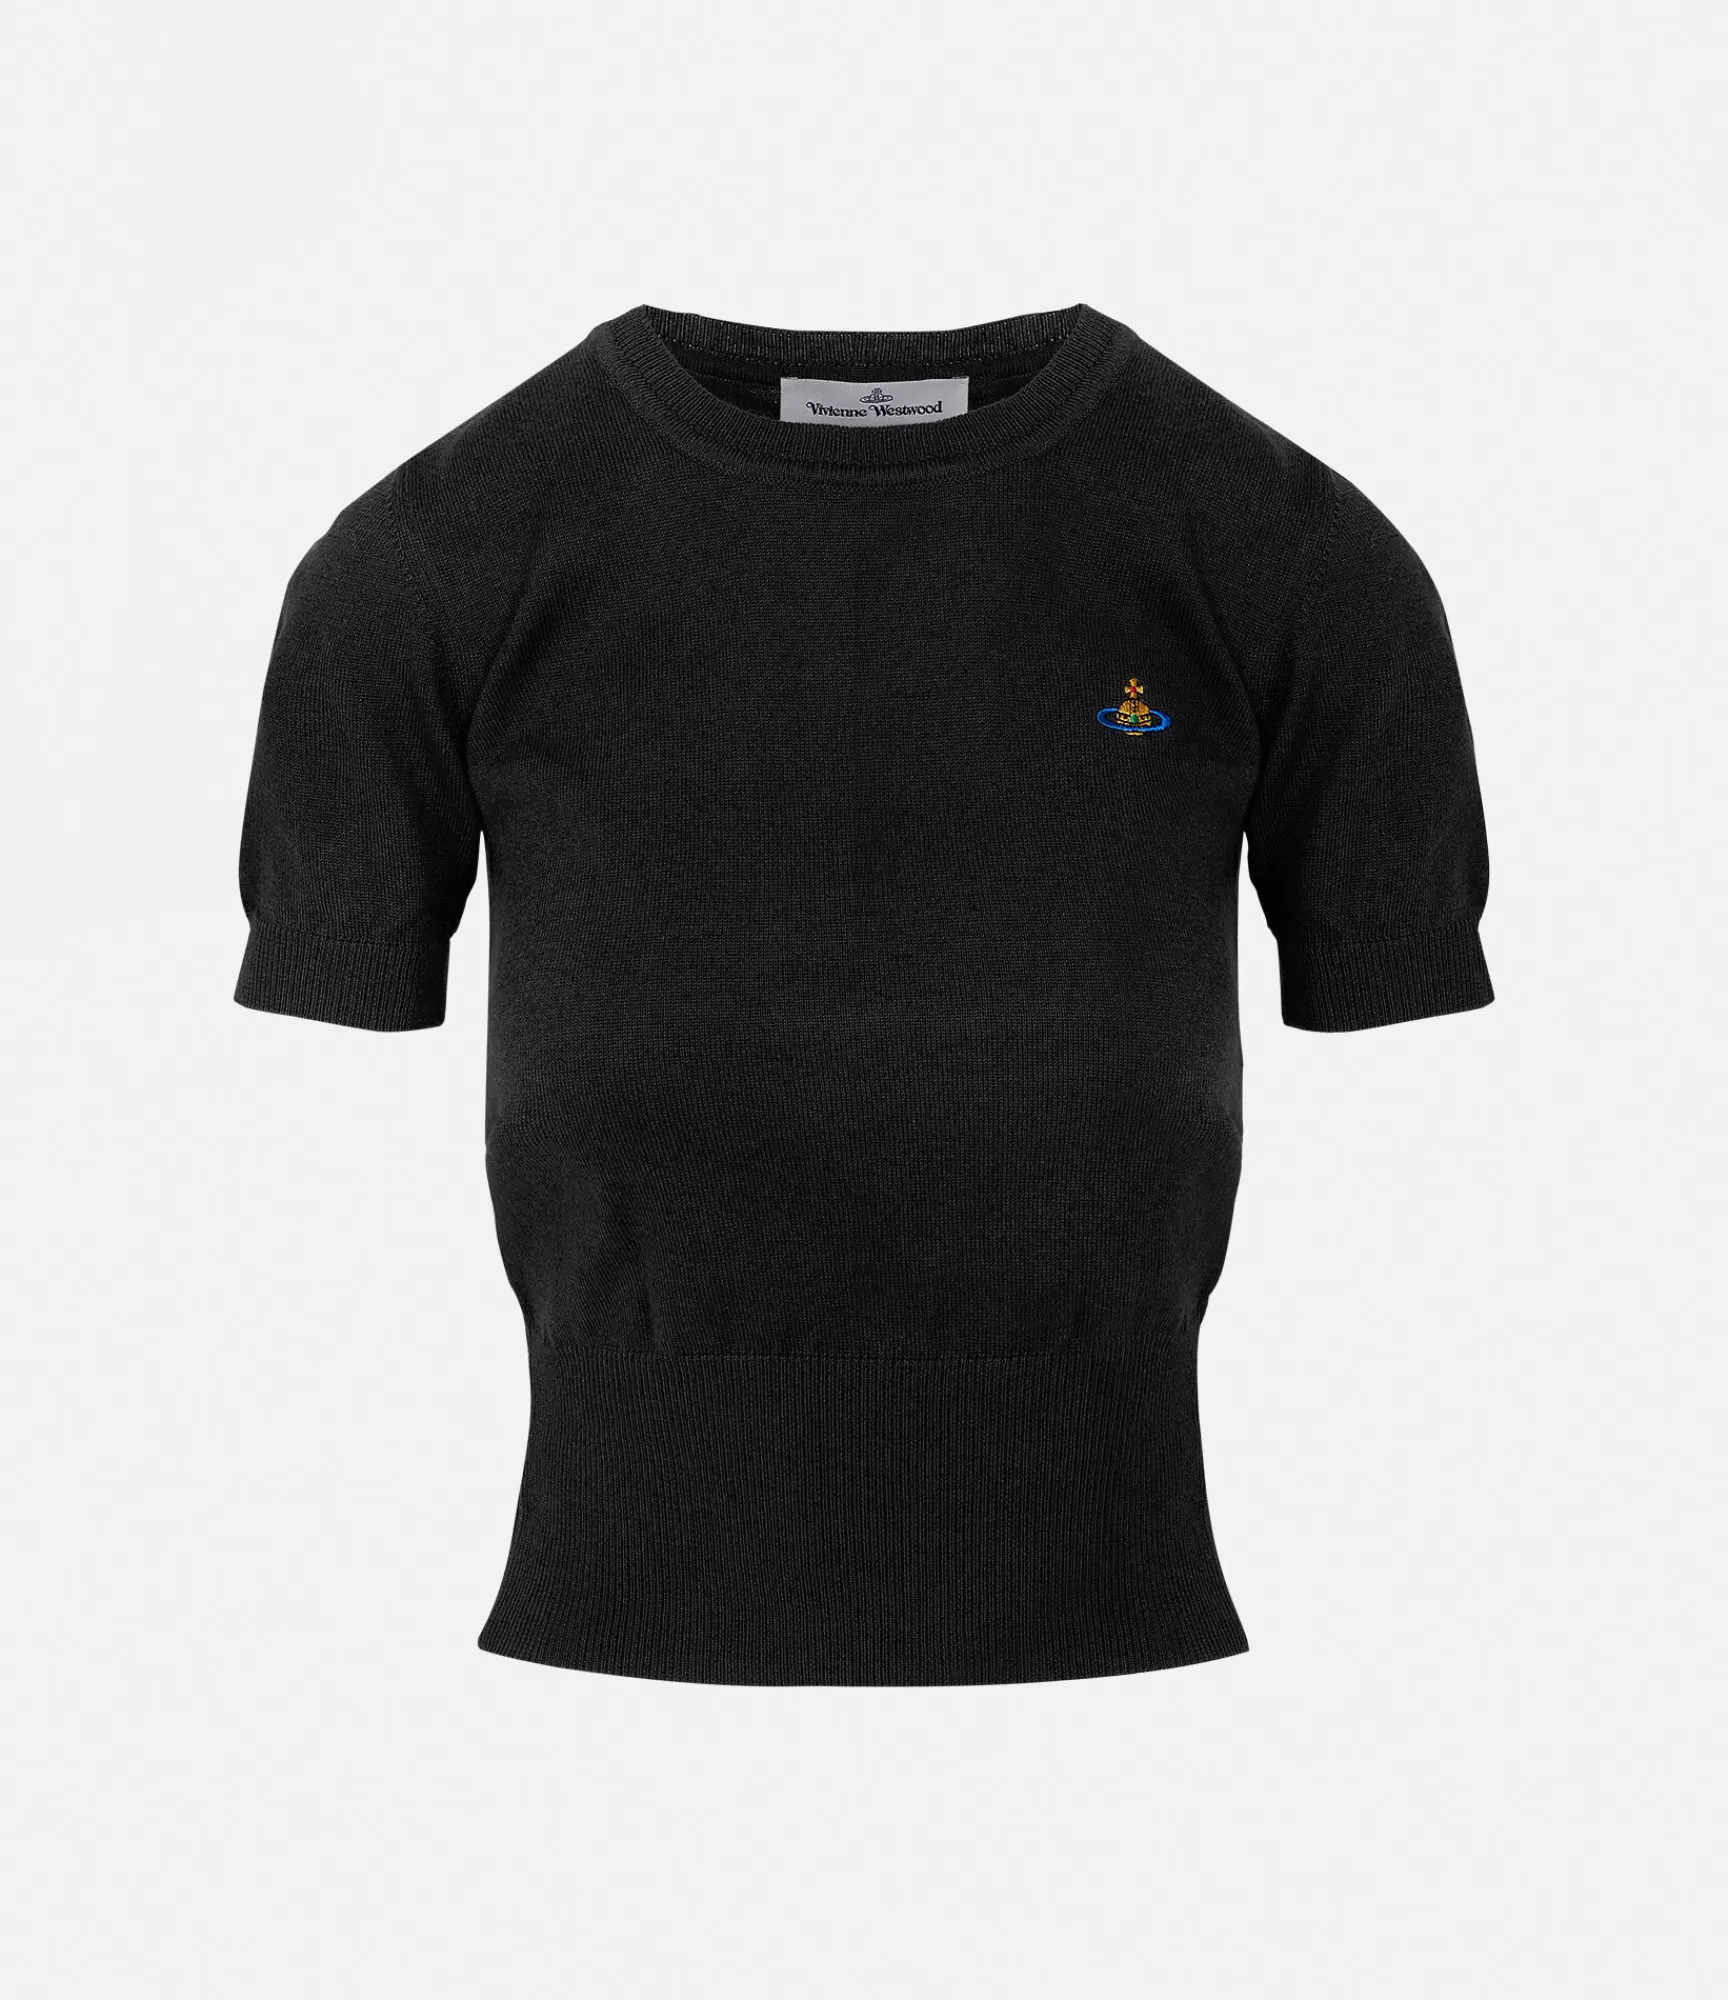 Vivienne Westwood Tops and Shirts | Knitwear*Bea top Black